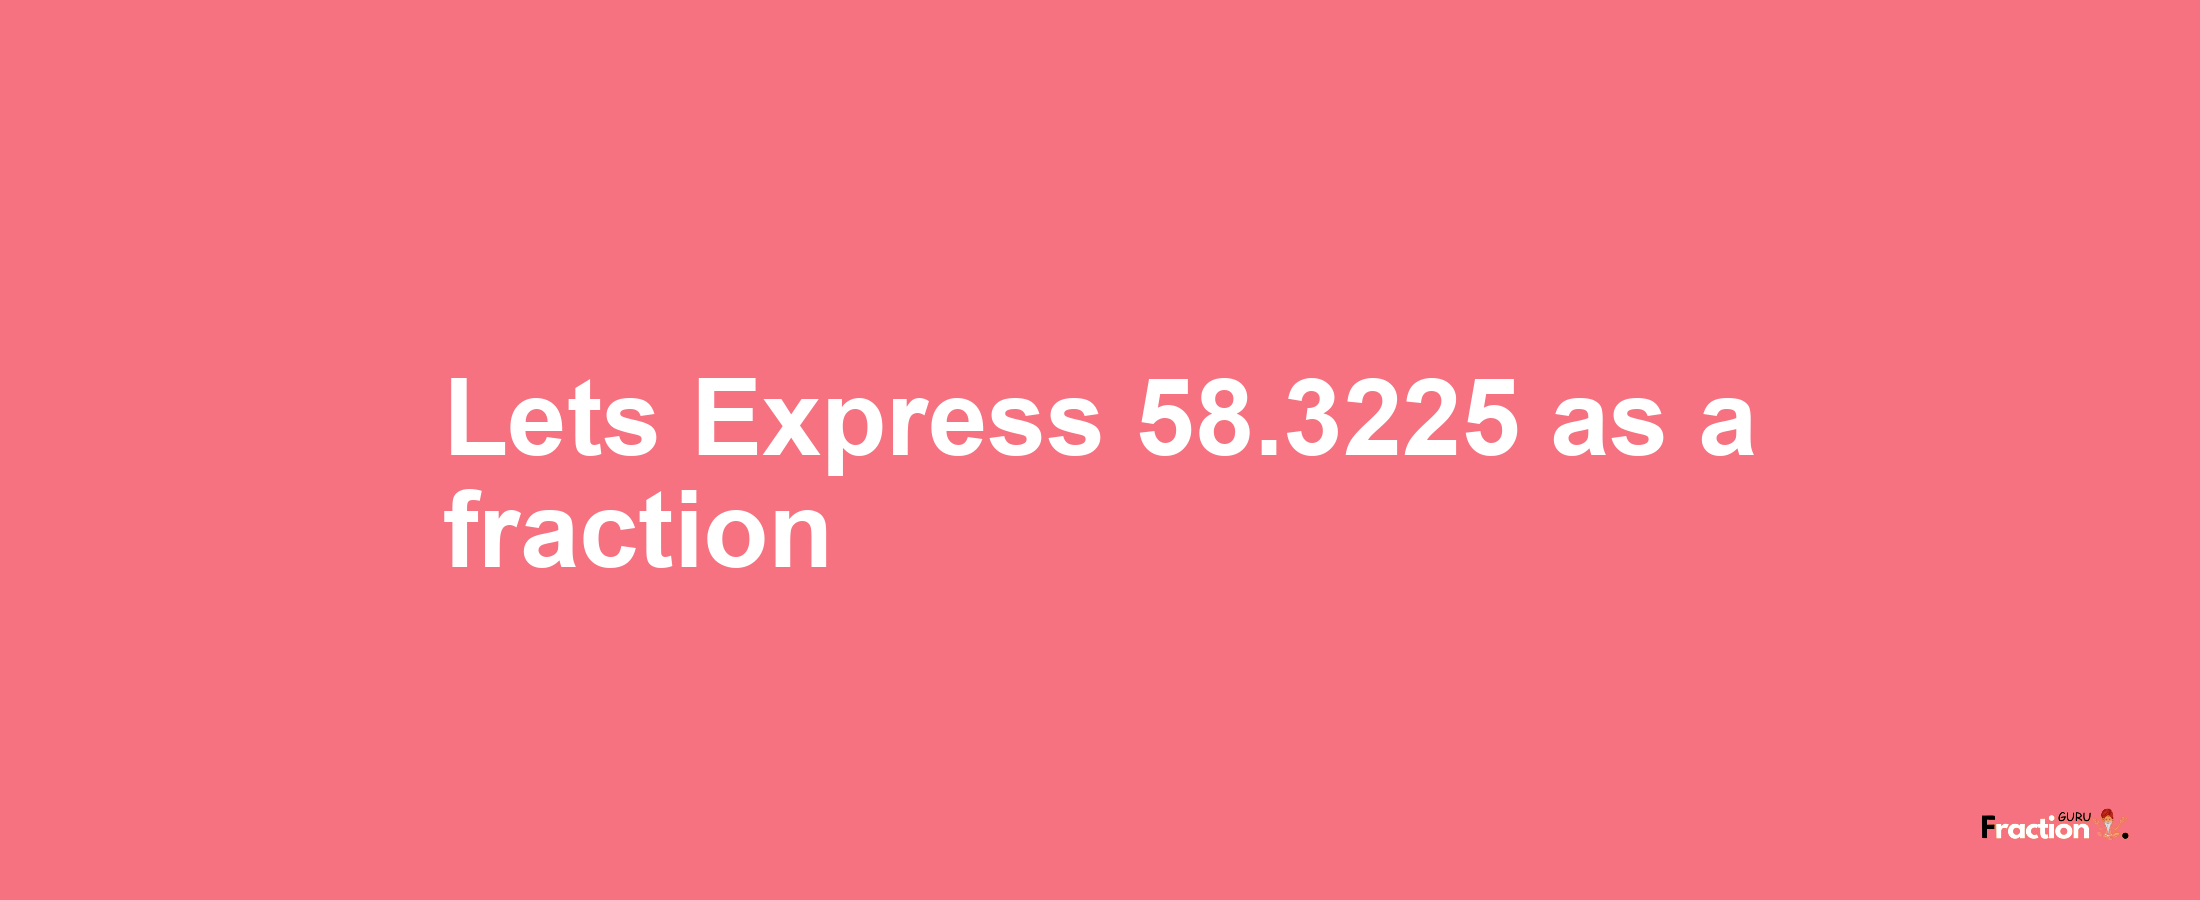 Lets Express 58.3225 as afraction